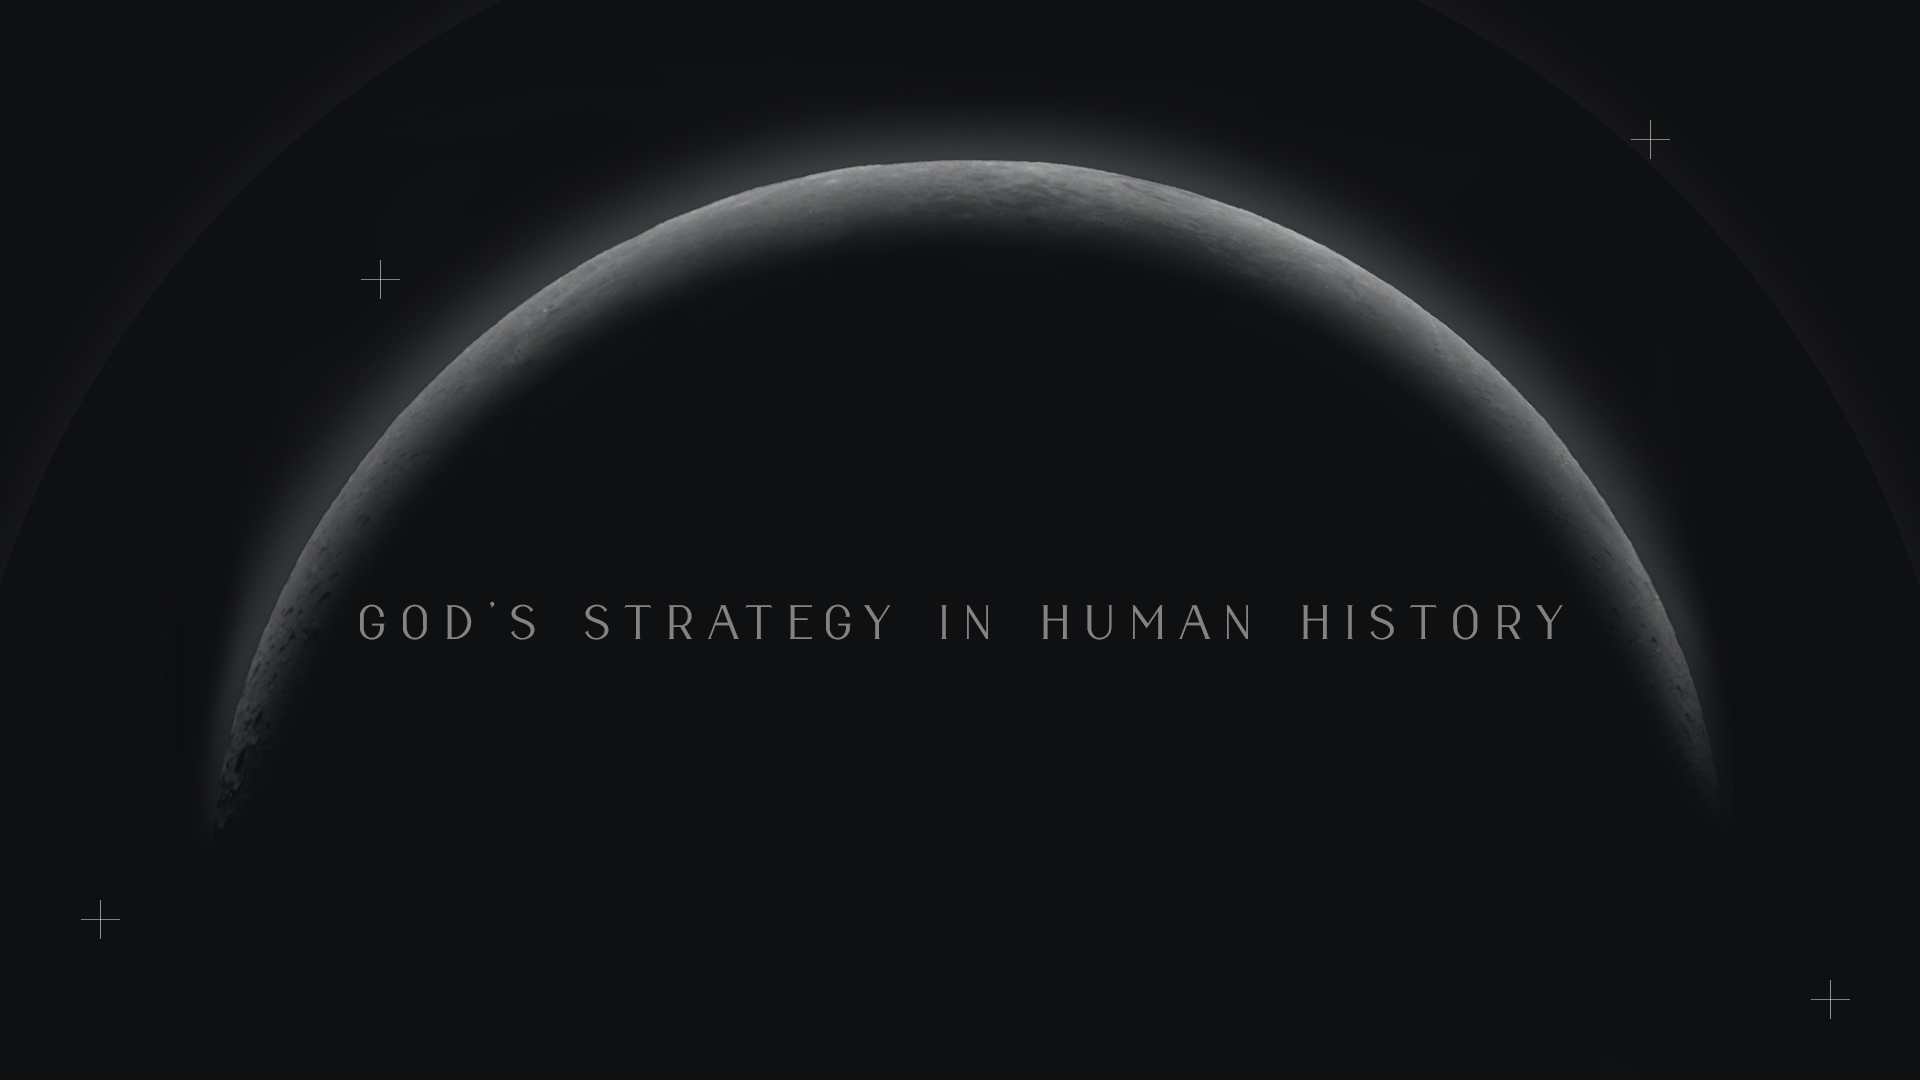 God's Strategy in Human History